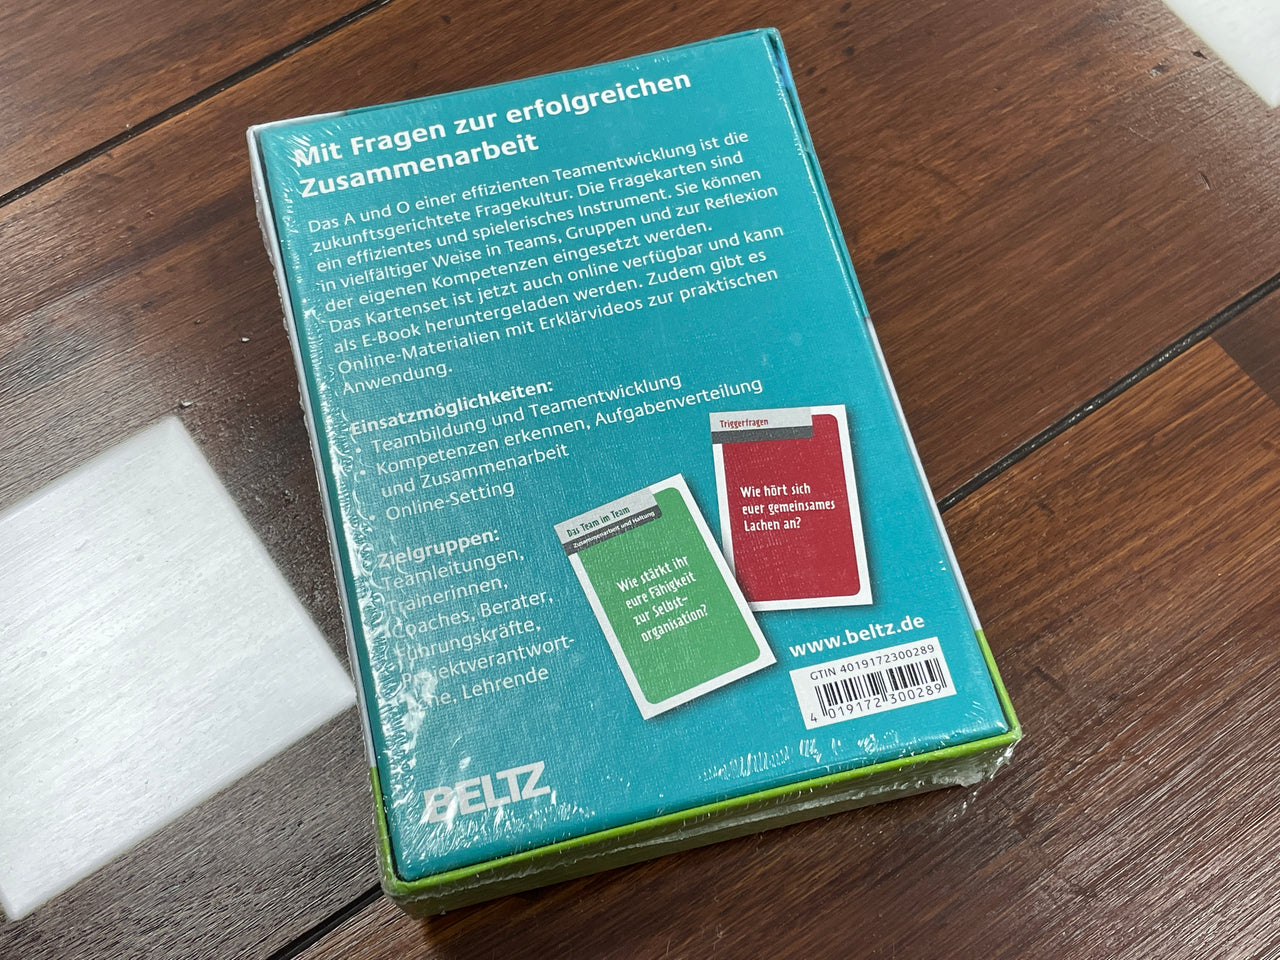 116 Questions for Successful Team Development - Question Cards Including Digital Version, 24-page Booklet, Explanatory Videos and Online Material (Coaching Cards)